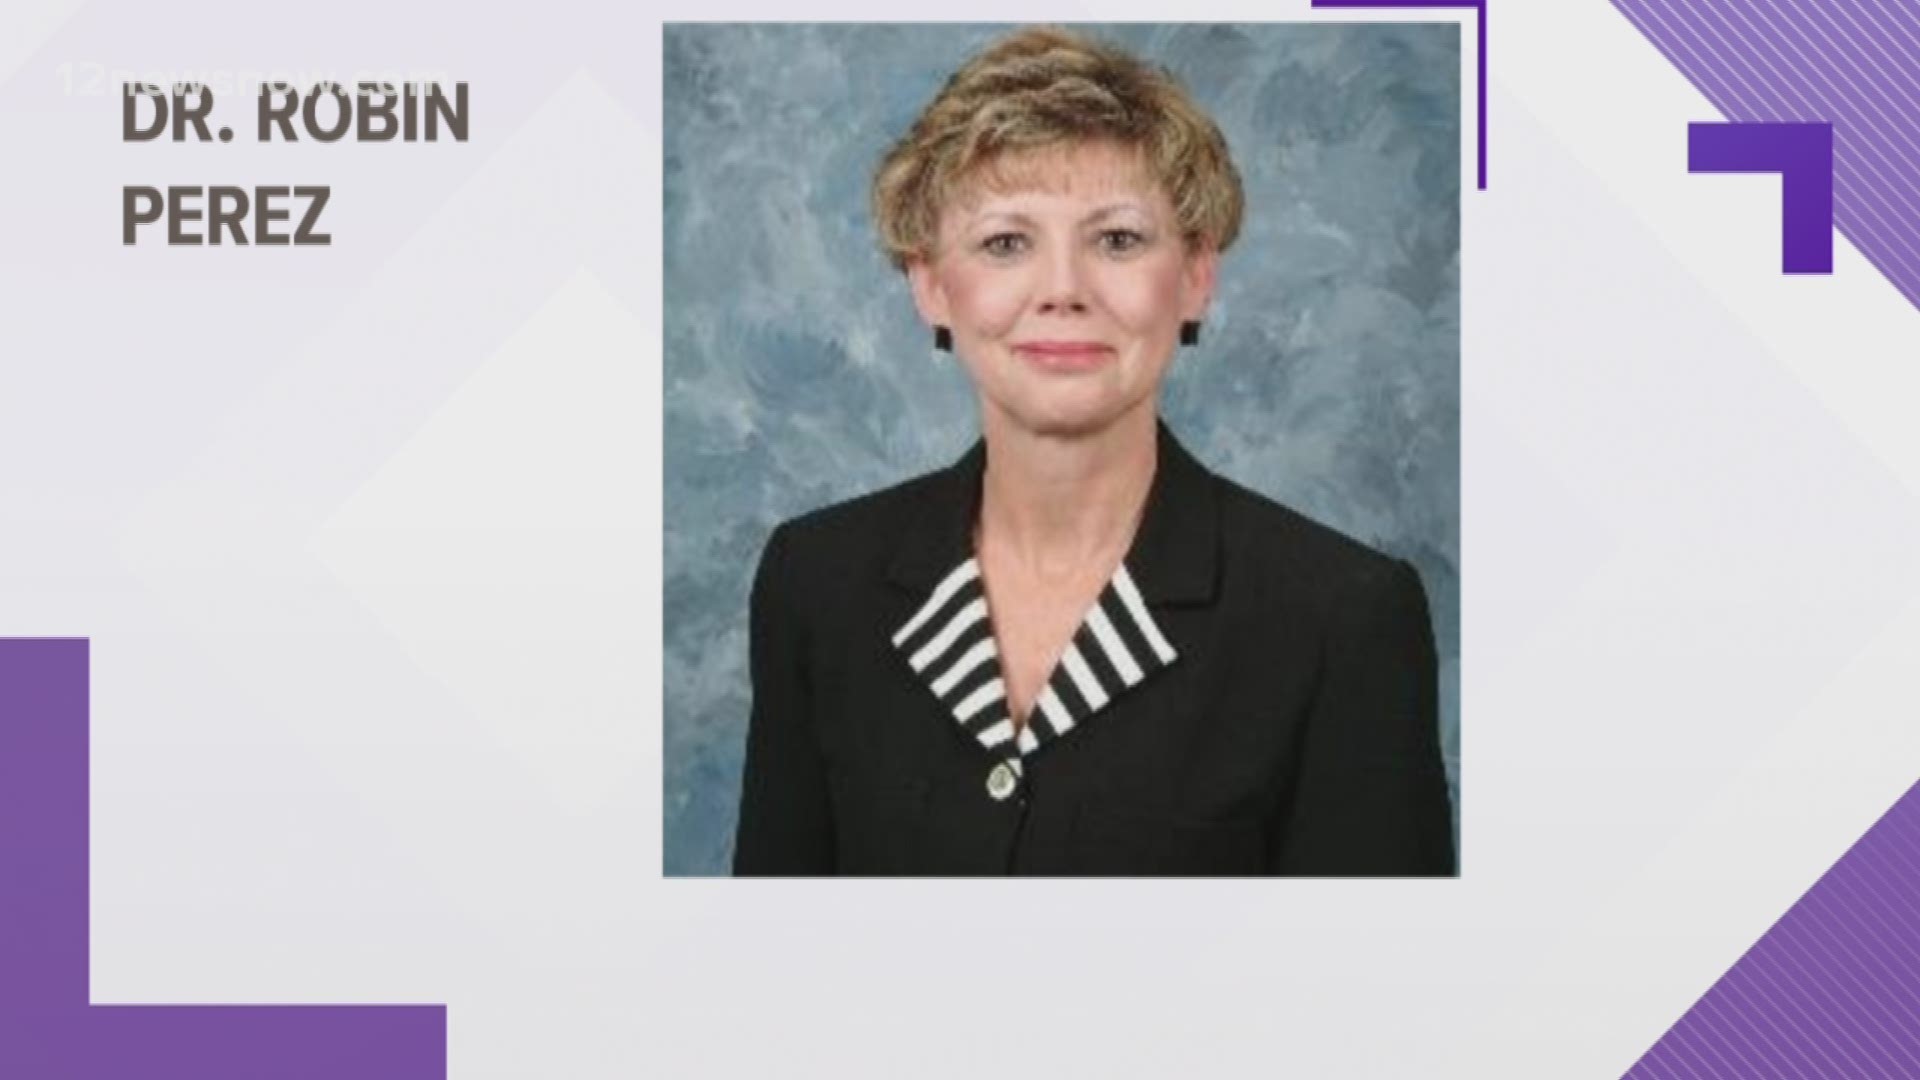 Dr. Robin Perez has served as the district's superintendent for more than four years.